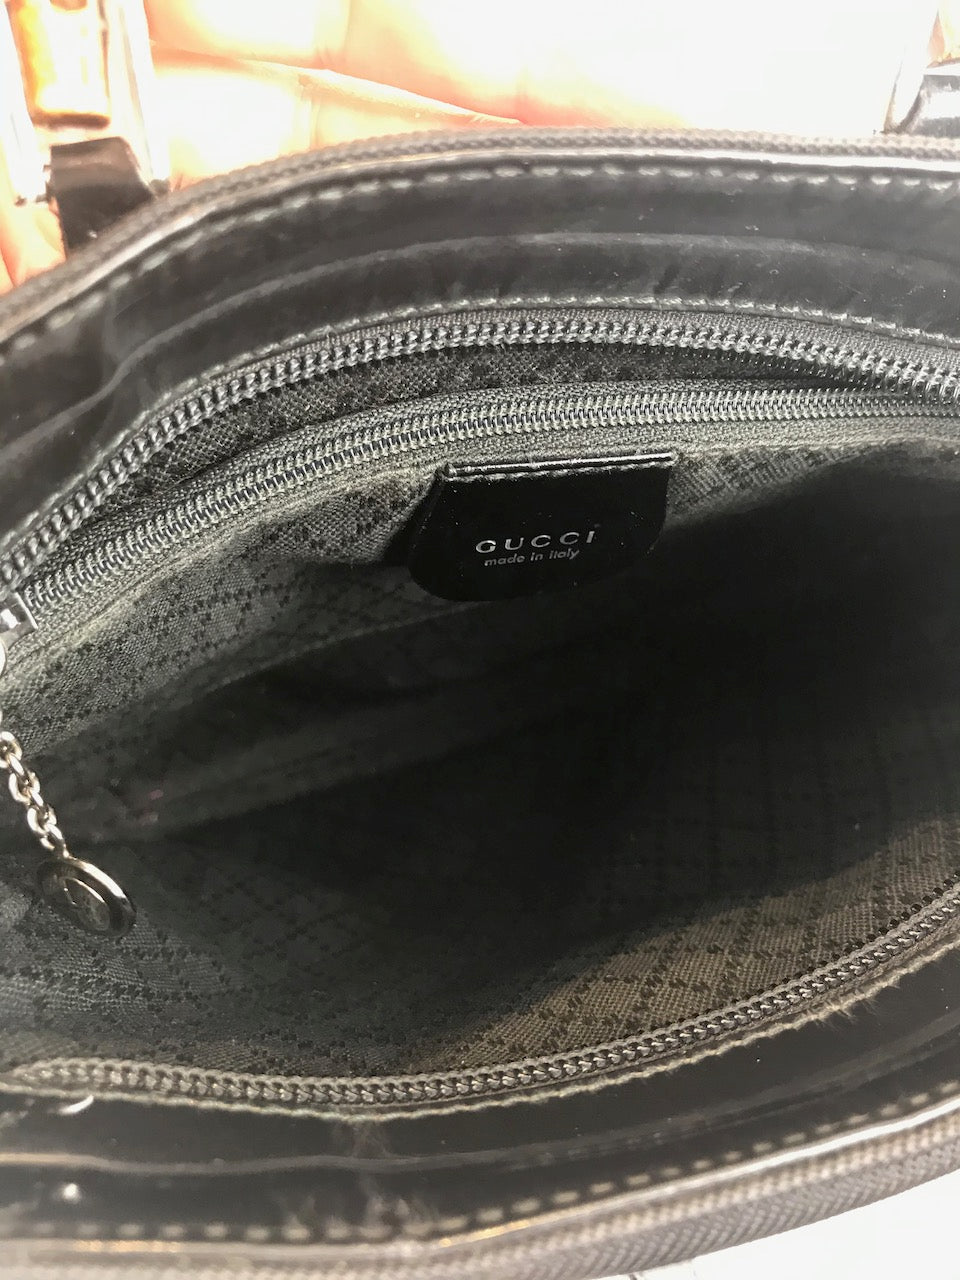 Gucci Small Black Canvas Crossbody with Bamboo Handles - As Seen On Instagram 09/09/2020 - Siopaella Designer Exchange